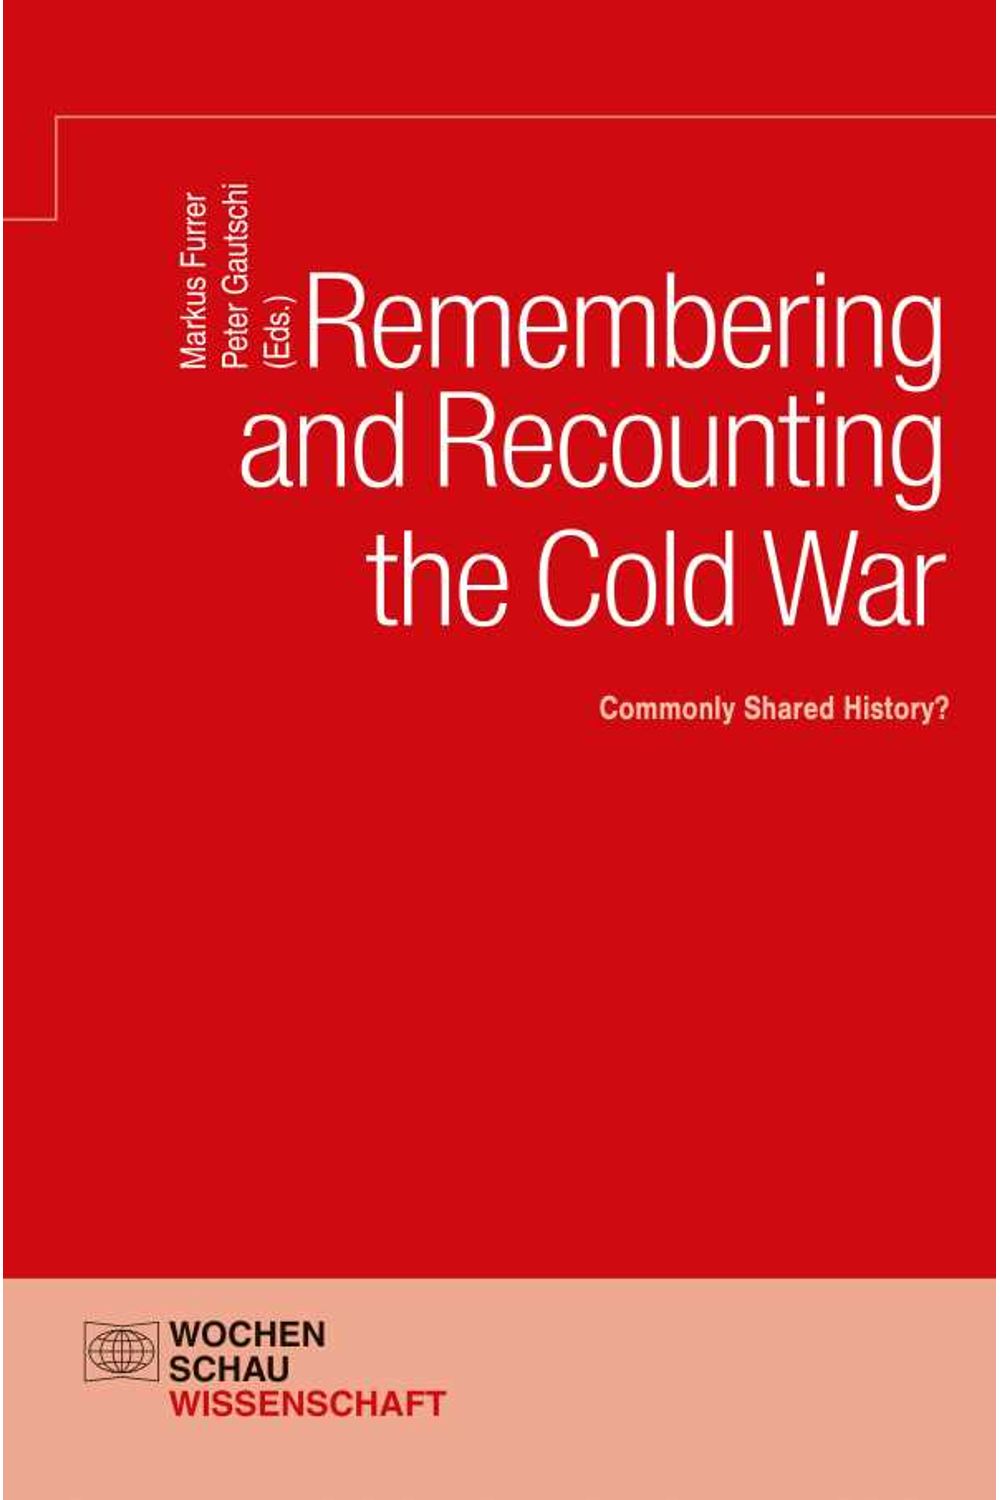 bw-remembering-and-recounting-the-cold-war-wochenschau-verlag-9783734404306